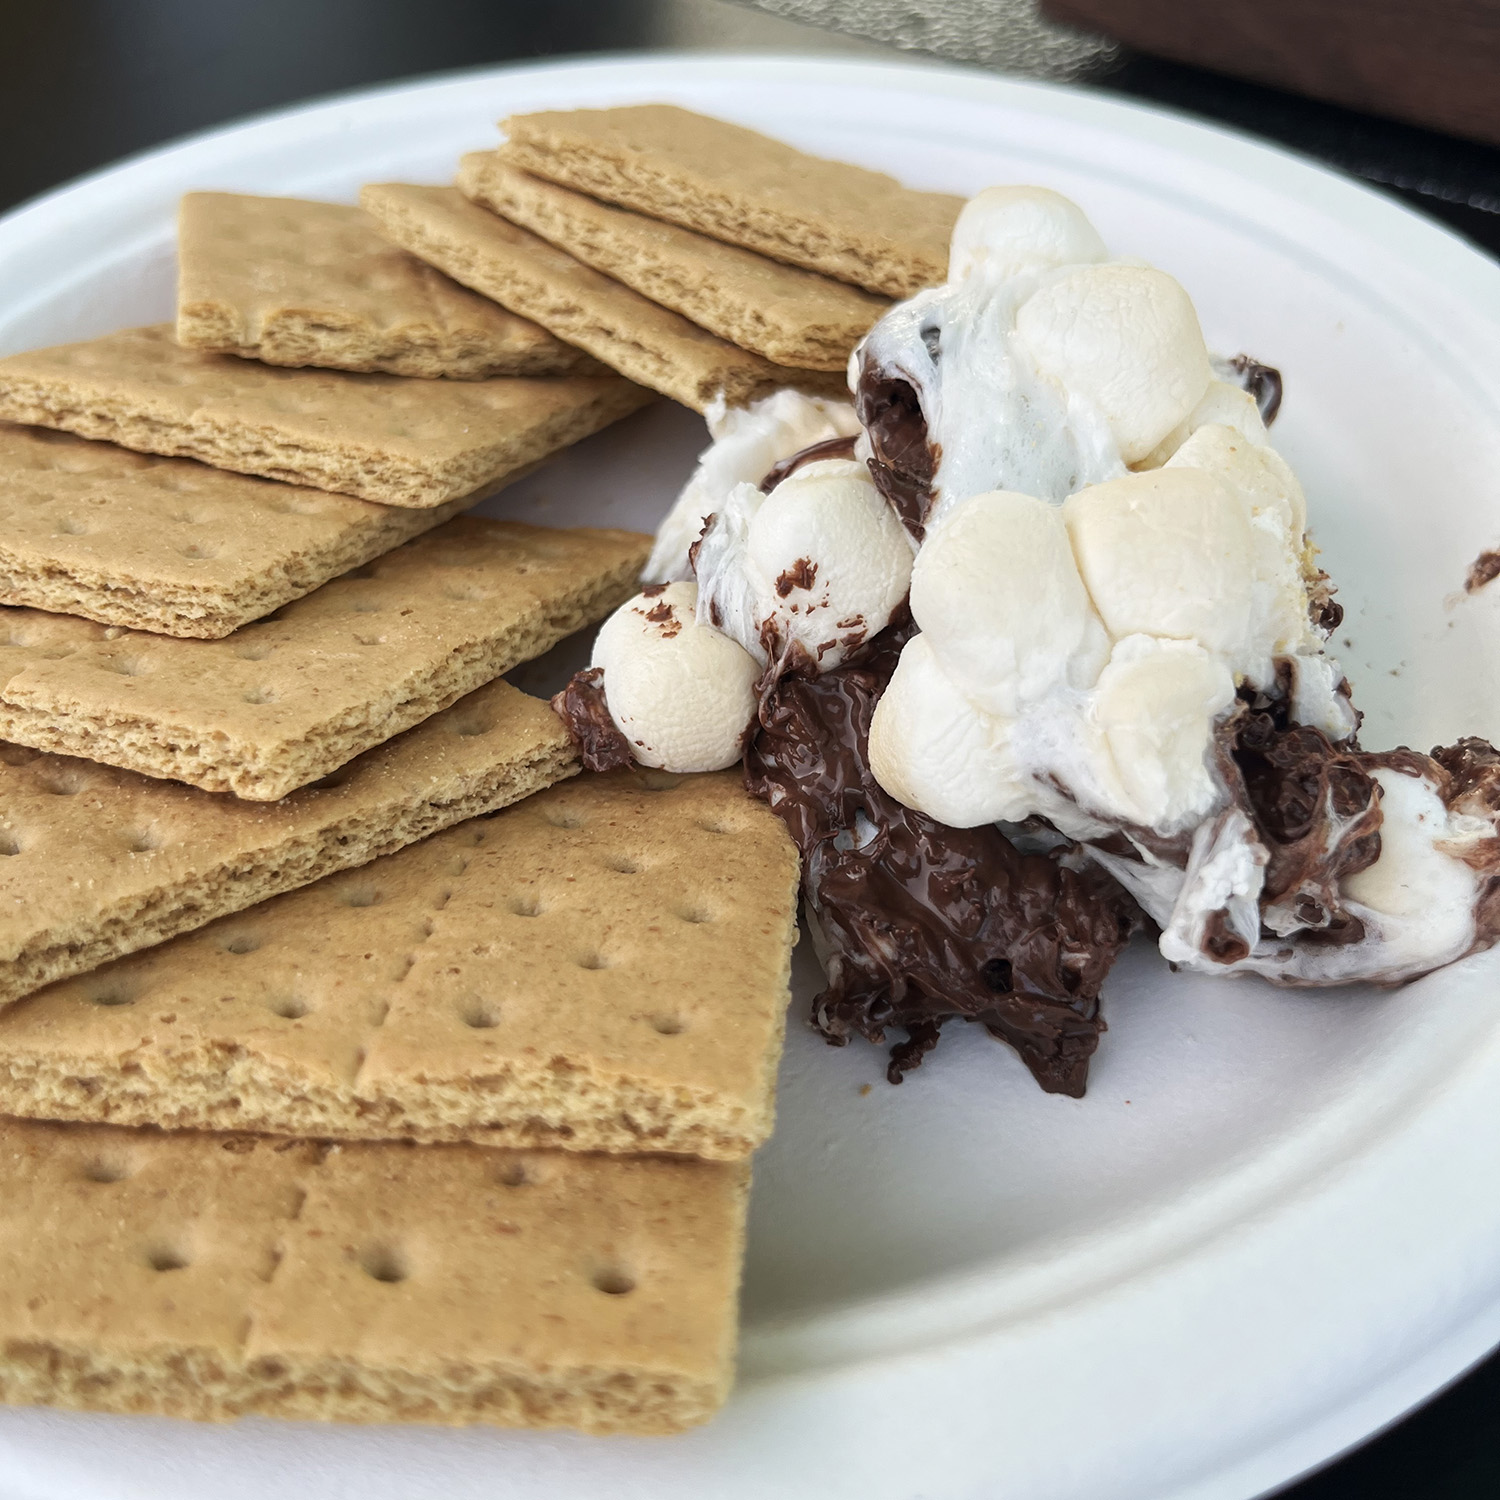 Big Green Egg smores on a plate recipe from hungarian butcher